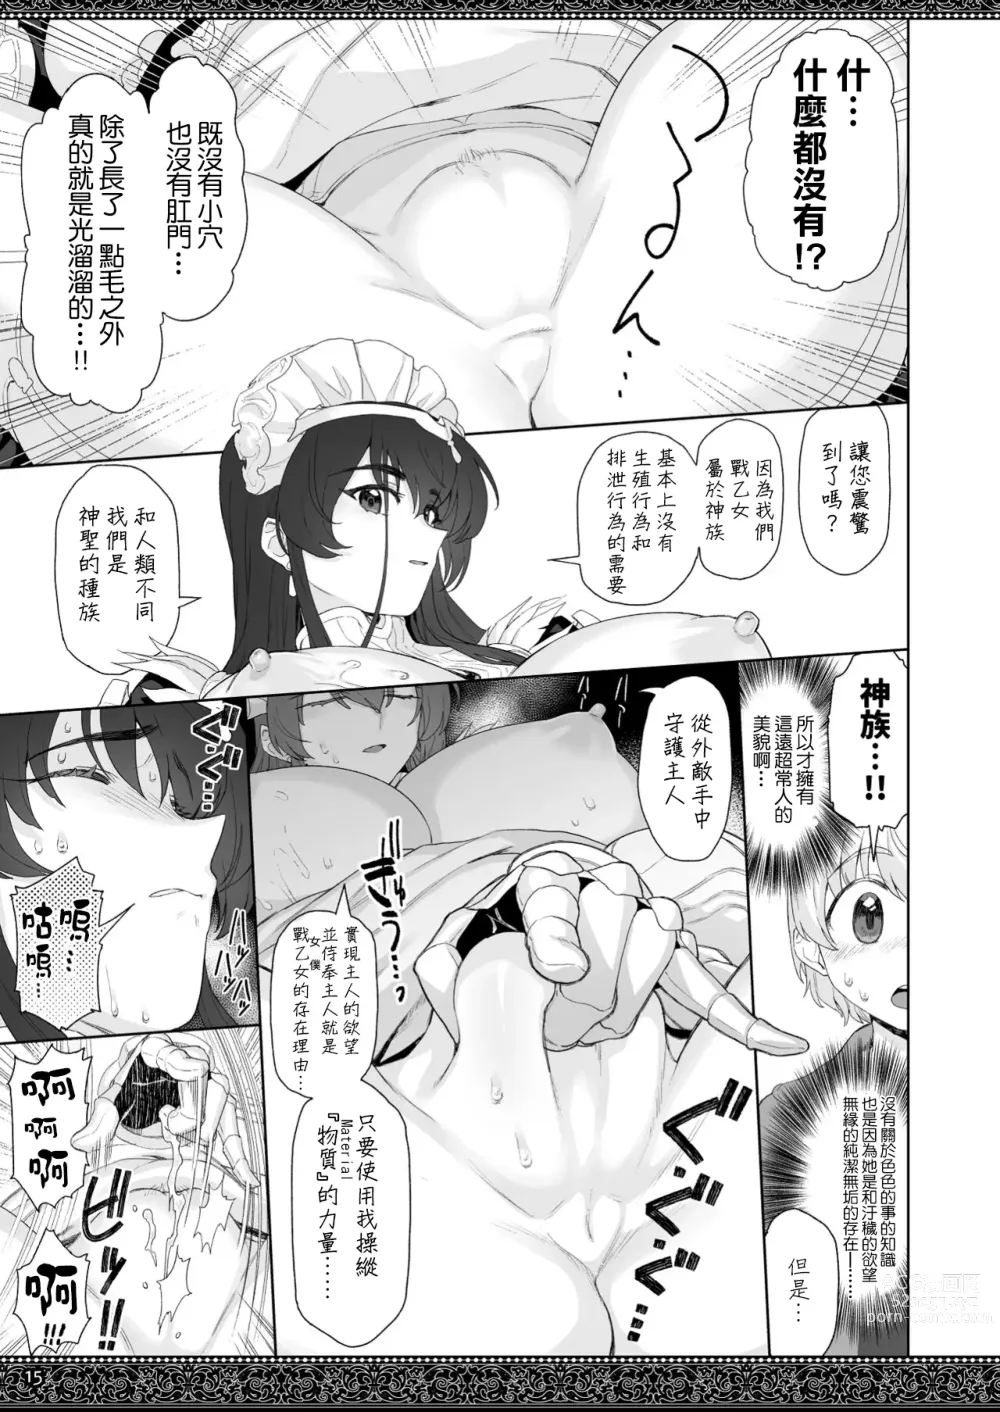 Page 15 of doujinshi 天上世界的女僕們